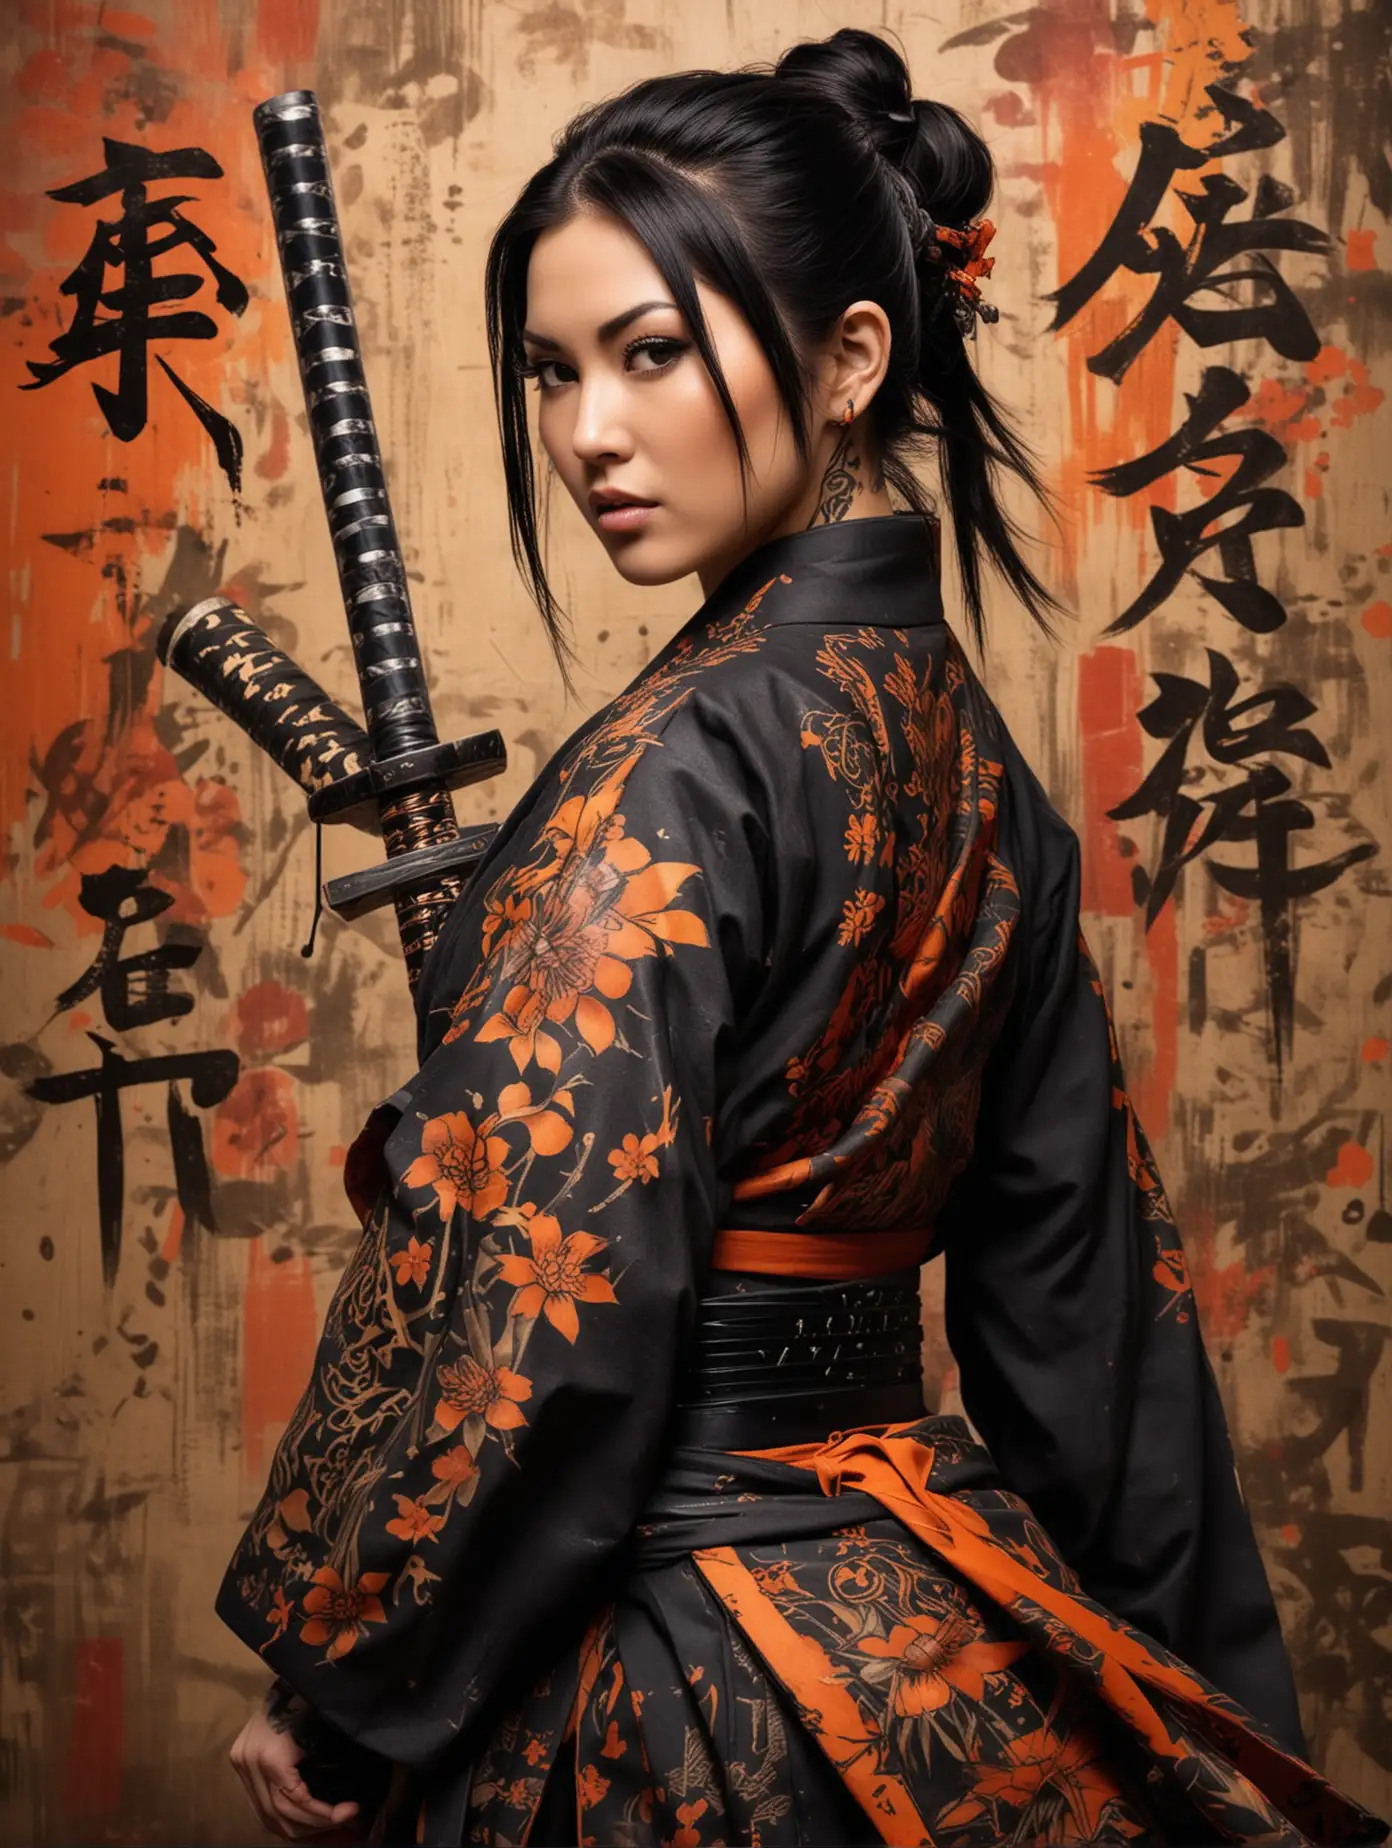 Create an image of a beautiful Maria Ozawa is cosplaying as japanese paladin with detailed facial features, standing against an abstract painted background with brush strokes and Asian characters. She is dressed in a traditional garment with orange and black hues, a long katana samurai strapped on her back, and her shoulder adorned with intricate text tattoos.